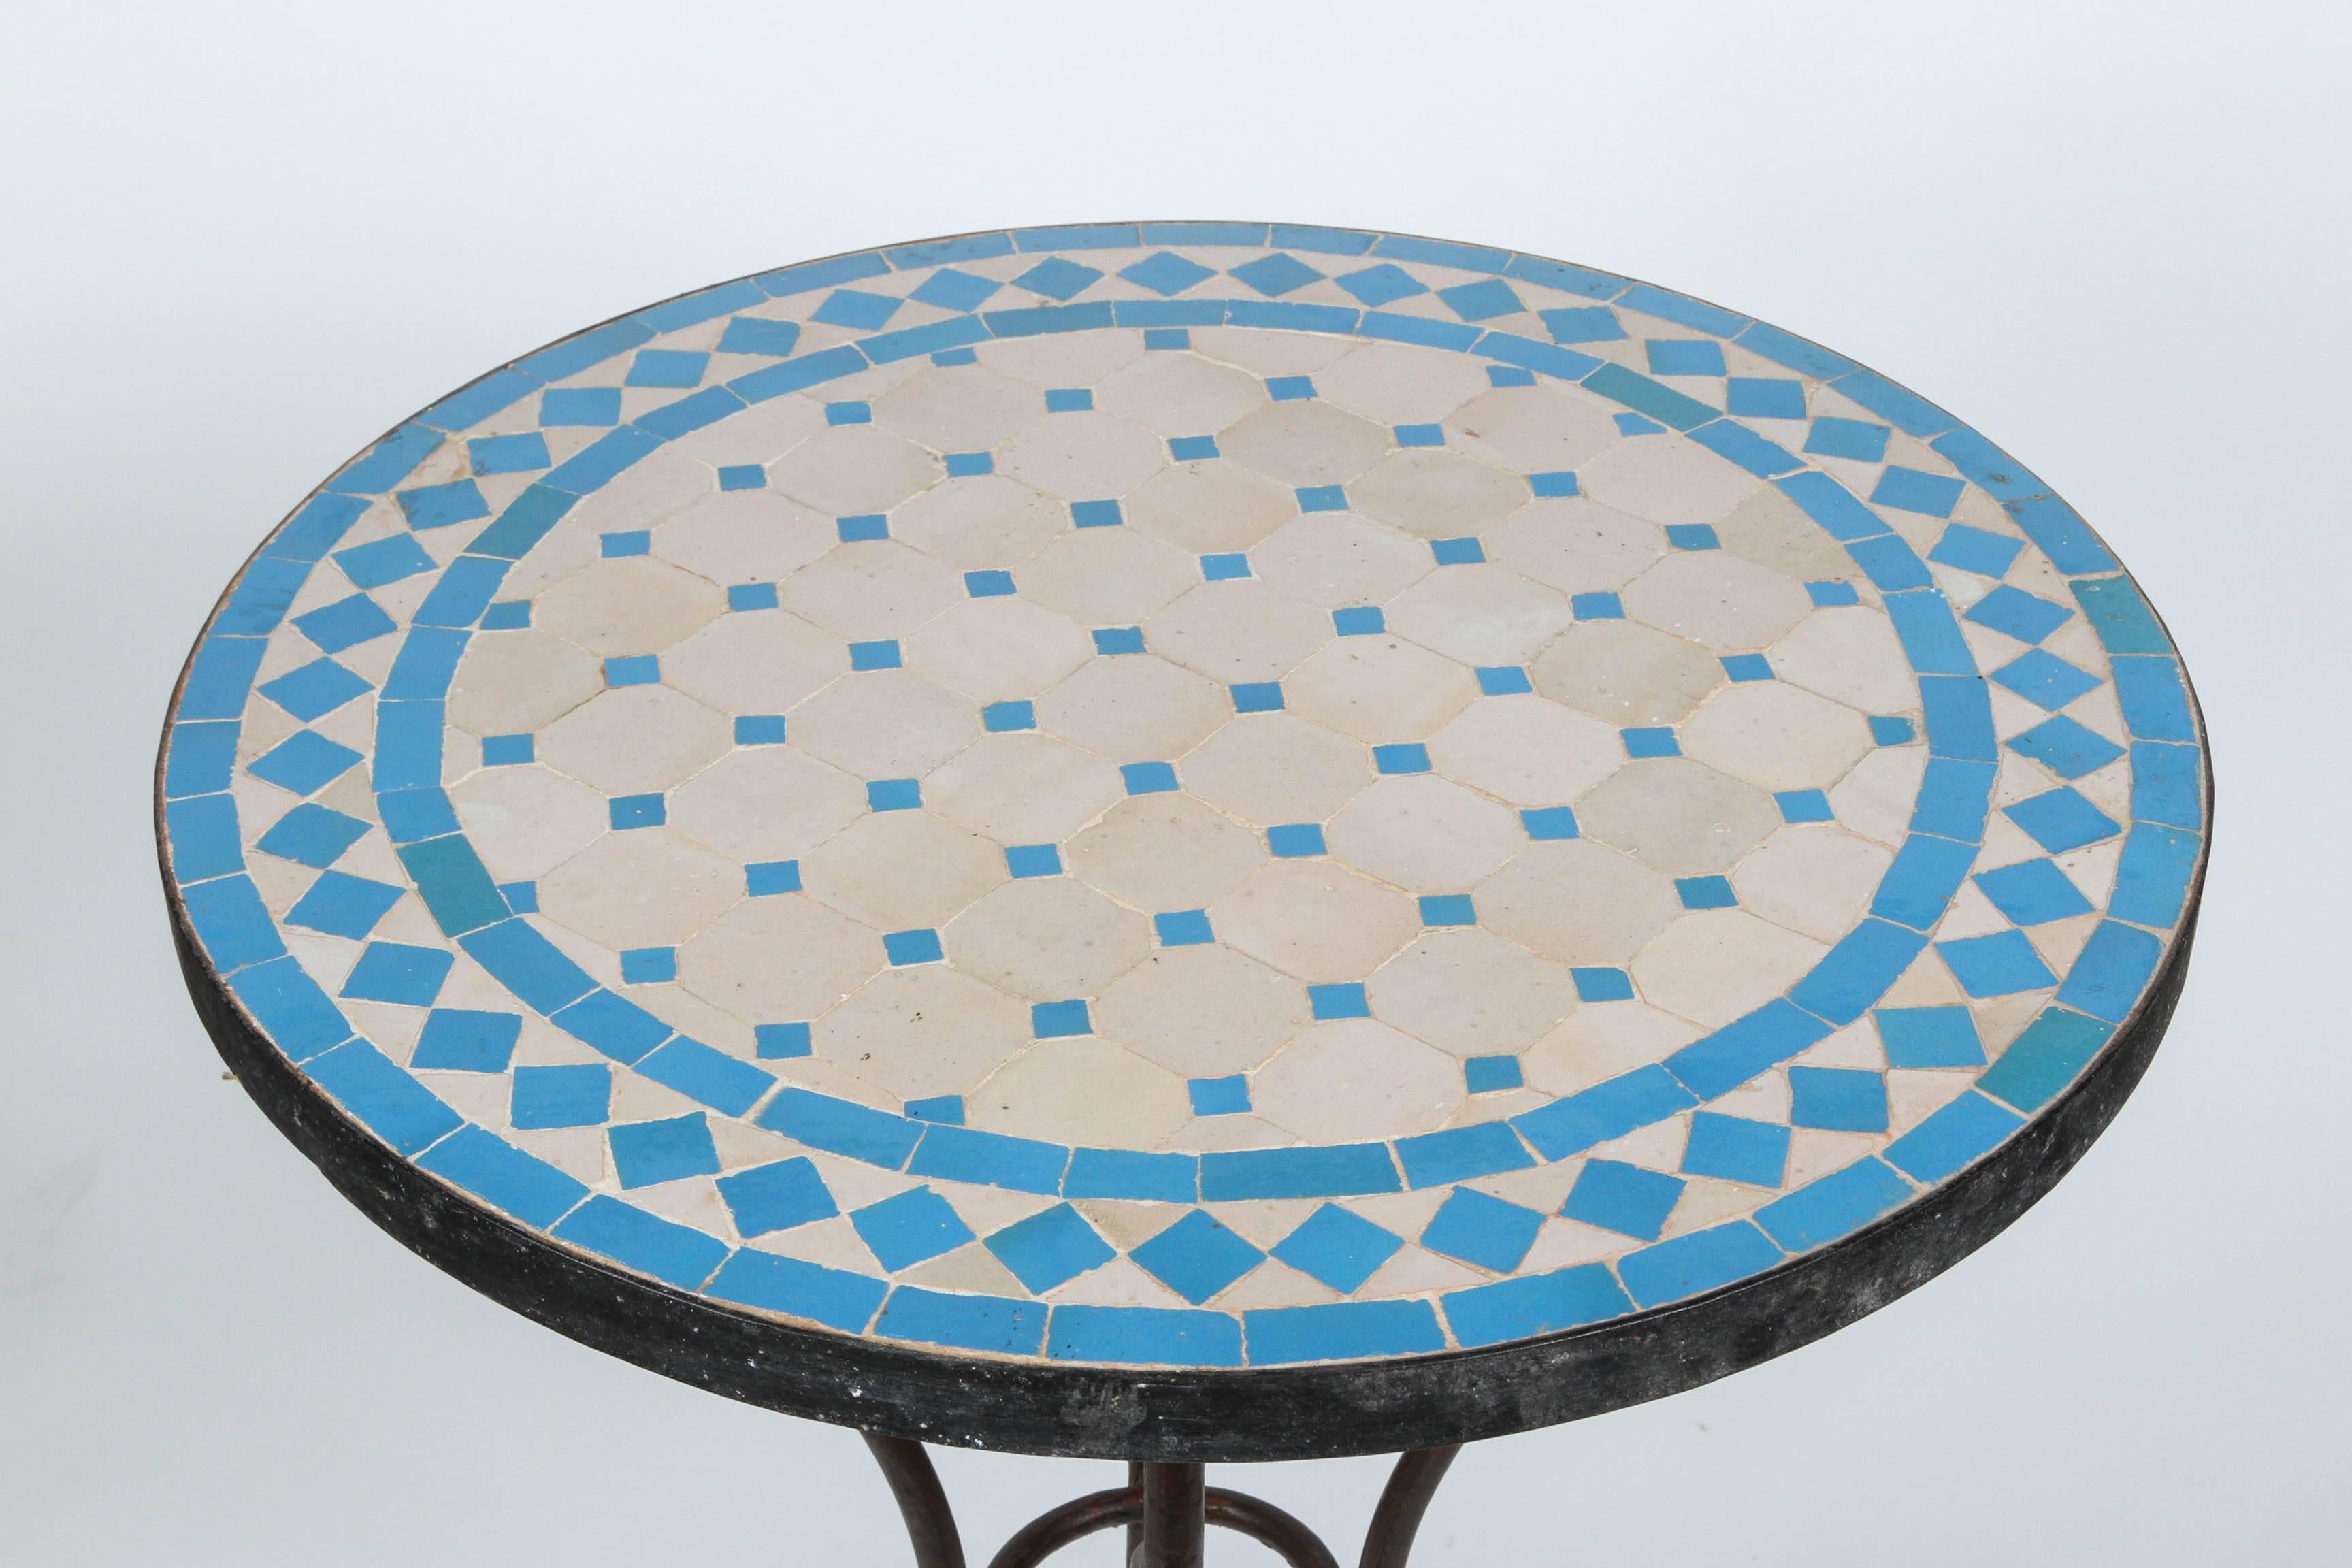 Moroccan mosaic tile  bistro table on iron base.
Handmade by expert artisans in Fez, Morocco using reclaimed old glazed tiles inlaid in concrete using reclaimed old glazed tiles and making beautiful geometrical designs, colors are turquoise blue and